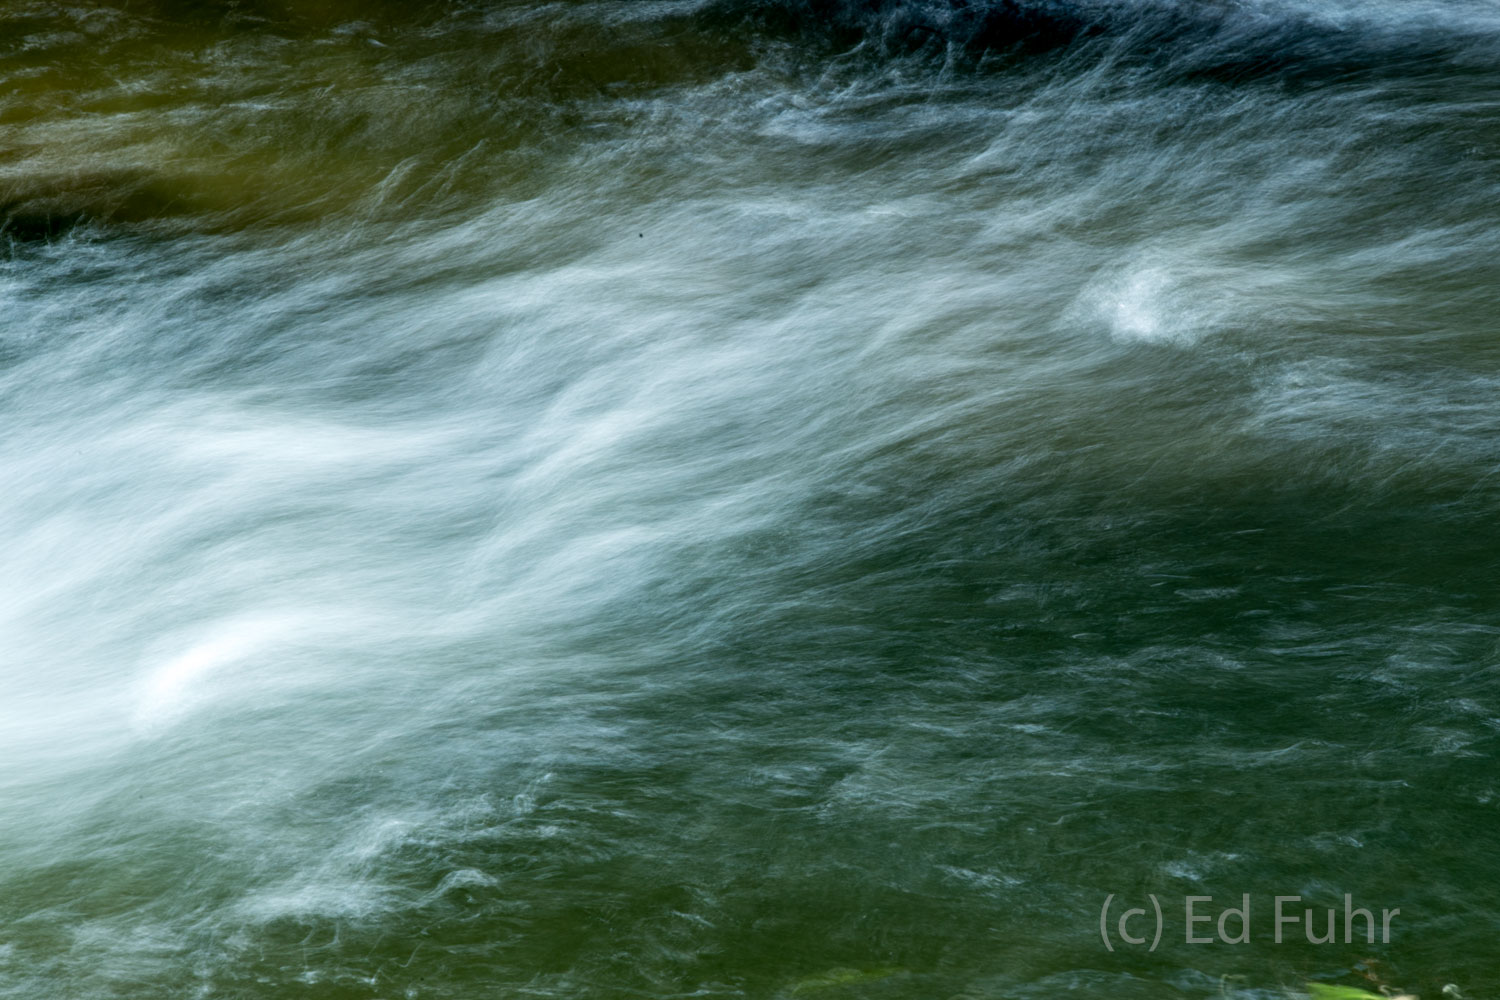 Ripples and motion, Smoky Mountain impressons.